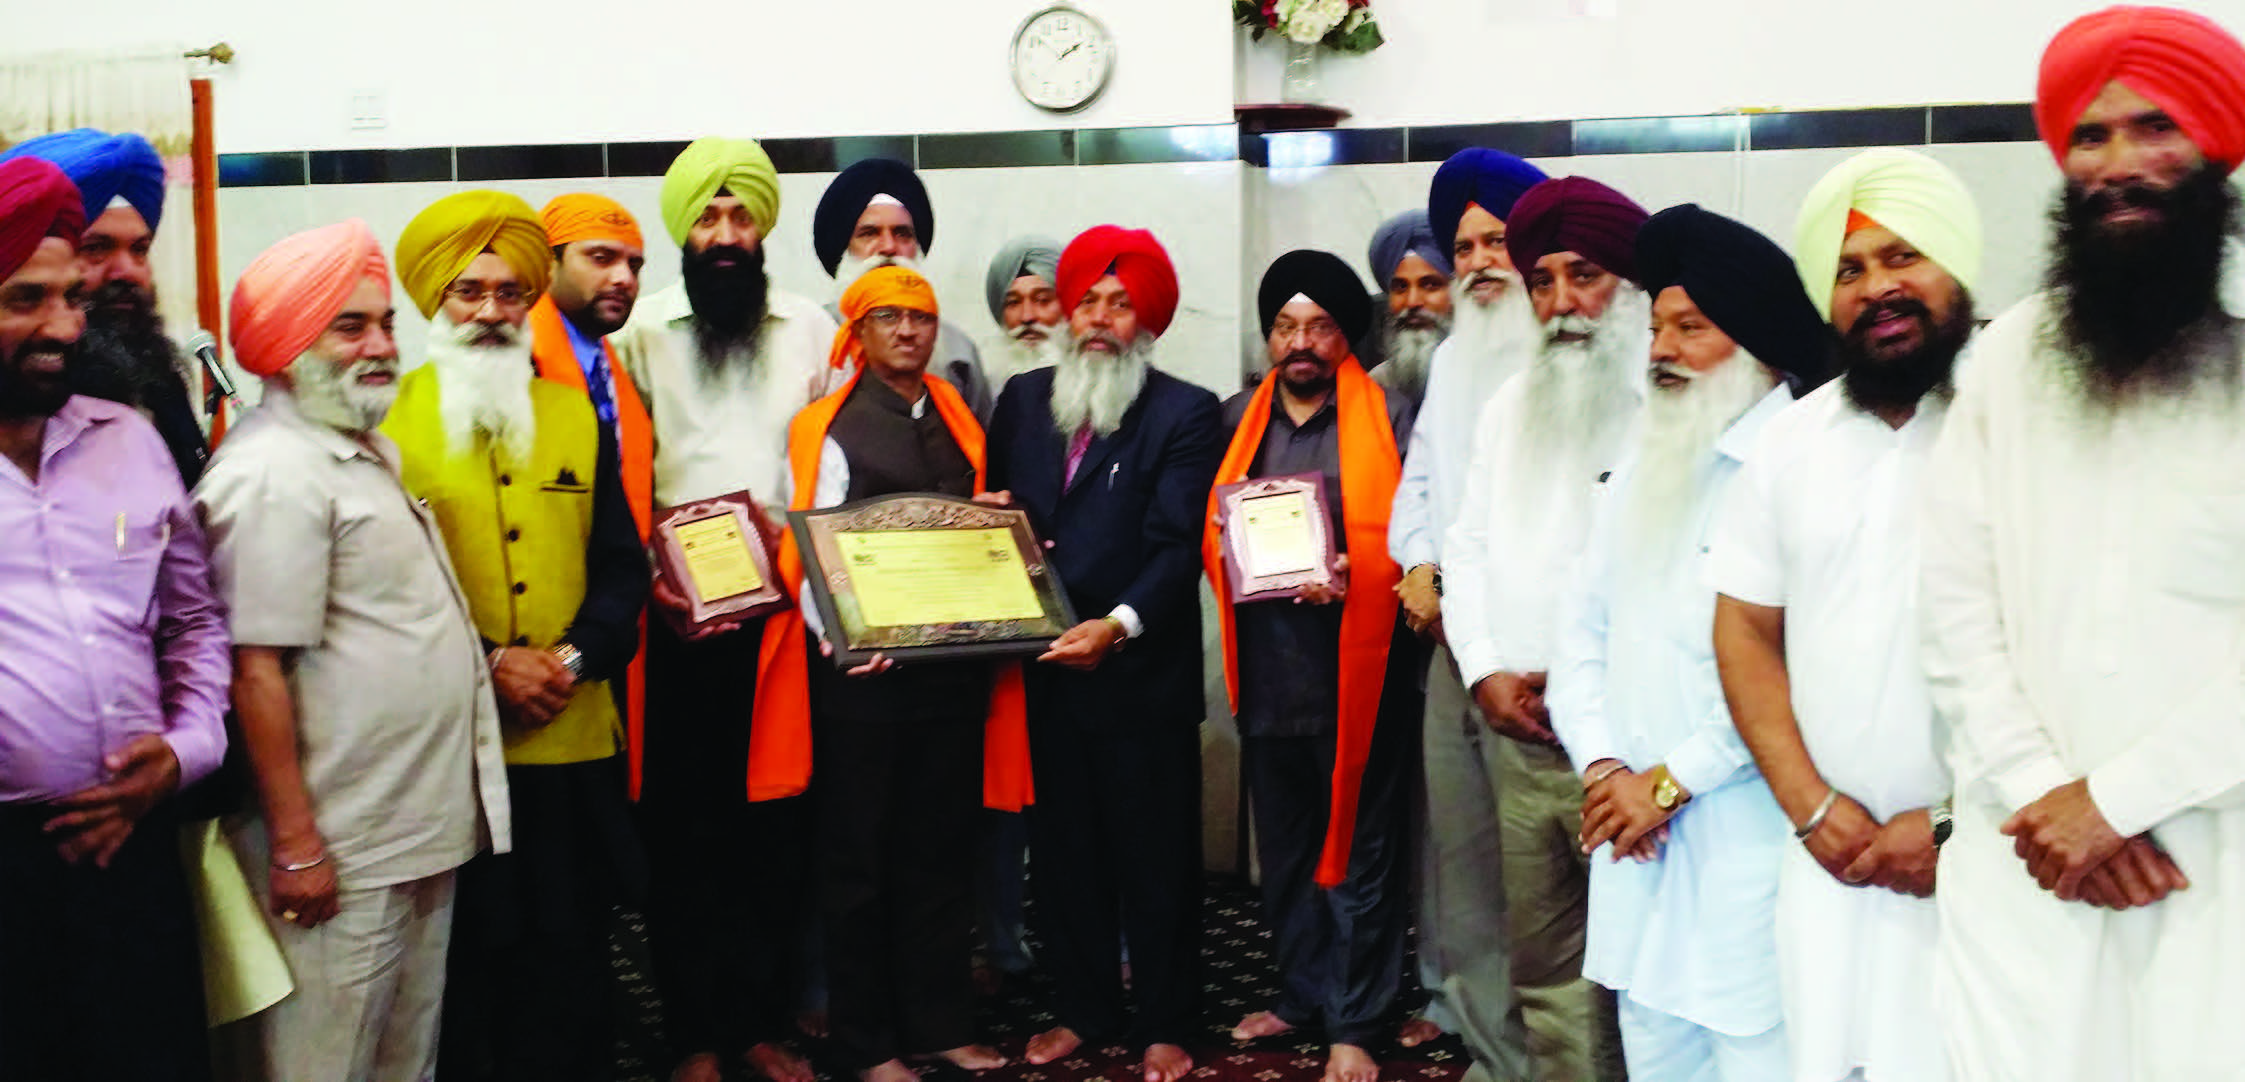 The management of Gurdwara Baba Makhan Shah Lobana , led by its President Himat Singh Sarpanch, honored Ambassador Dnyaneshwar Mulay, Consul General of India in New York, with a plaque, May 31, 2015. Also honored on the occasion were Cox & King Manager Ranjeet Singh and The Indian Panorama editor, Prof. Indrajit Singh Saluja.